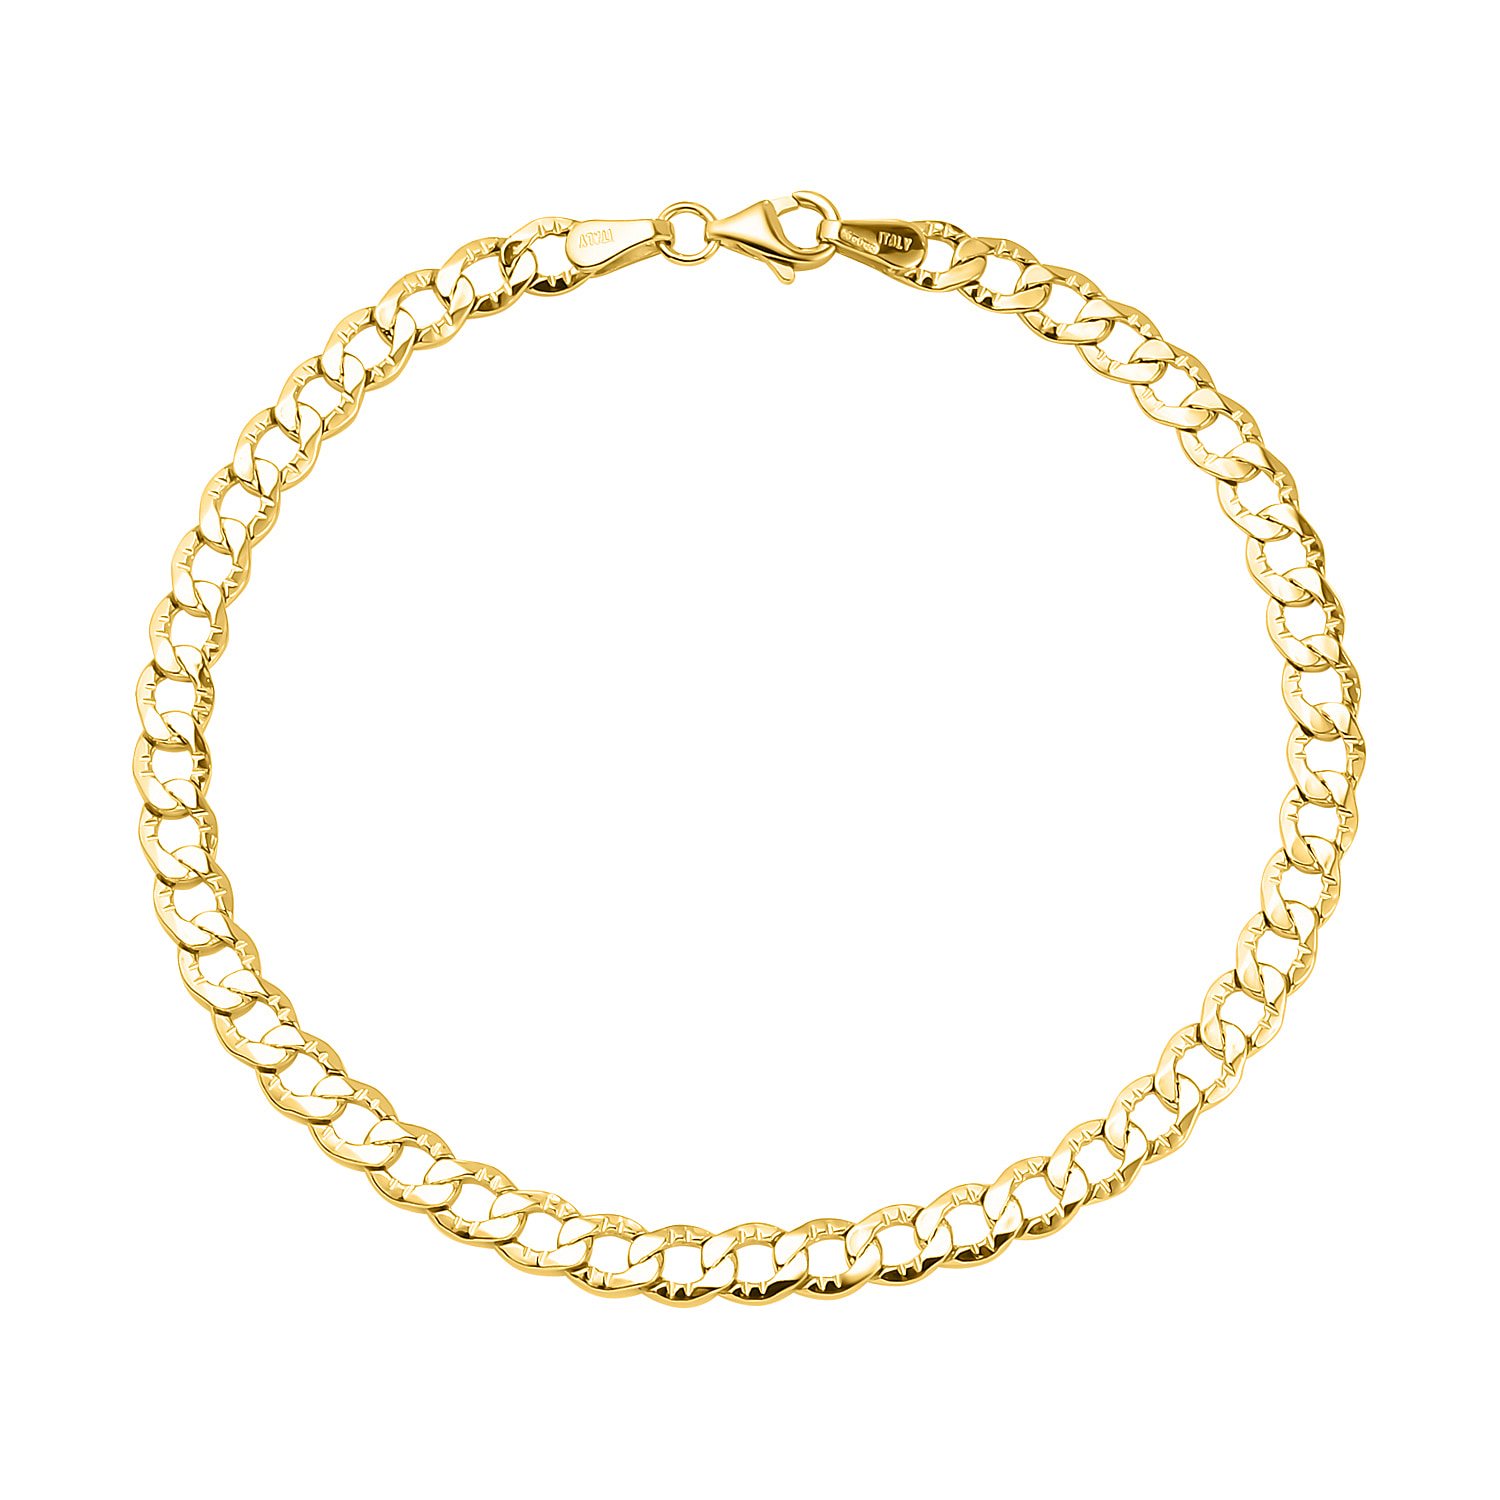 9K Yellow Gold Hollow Curb Bracelet Size - 7.5 inches